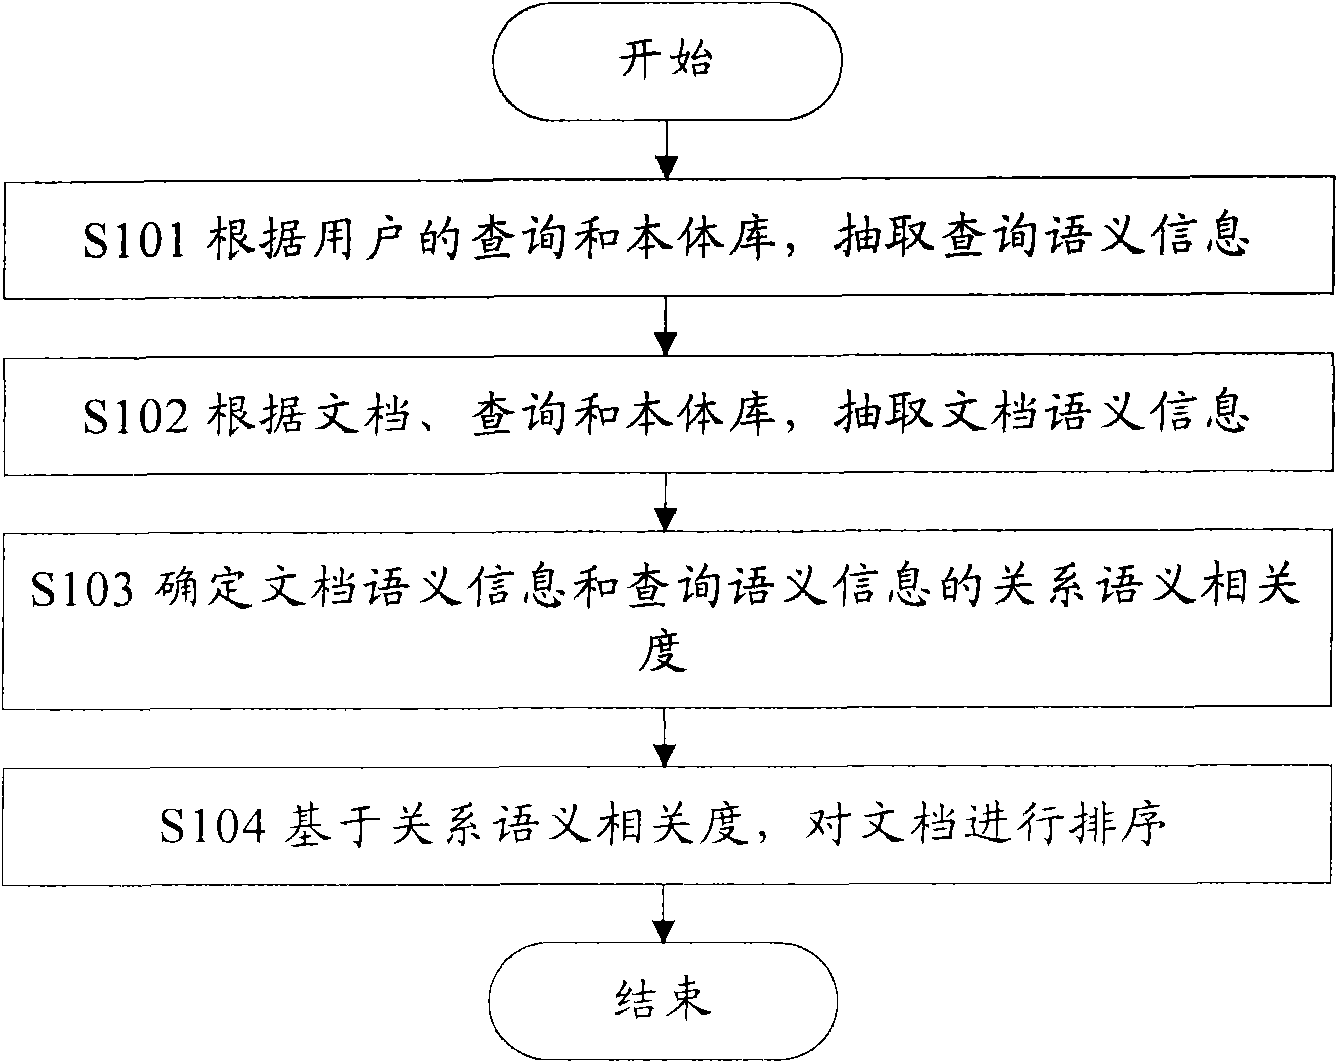 Method and equipment for sorting document